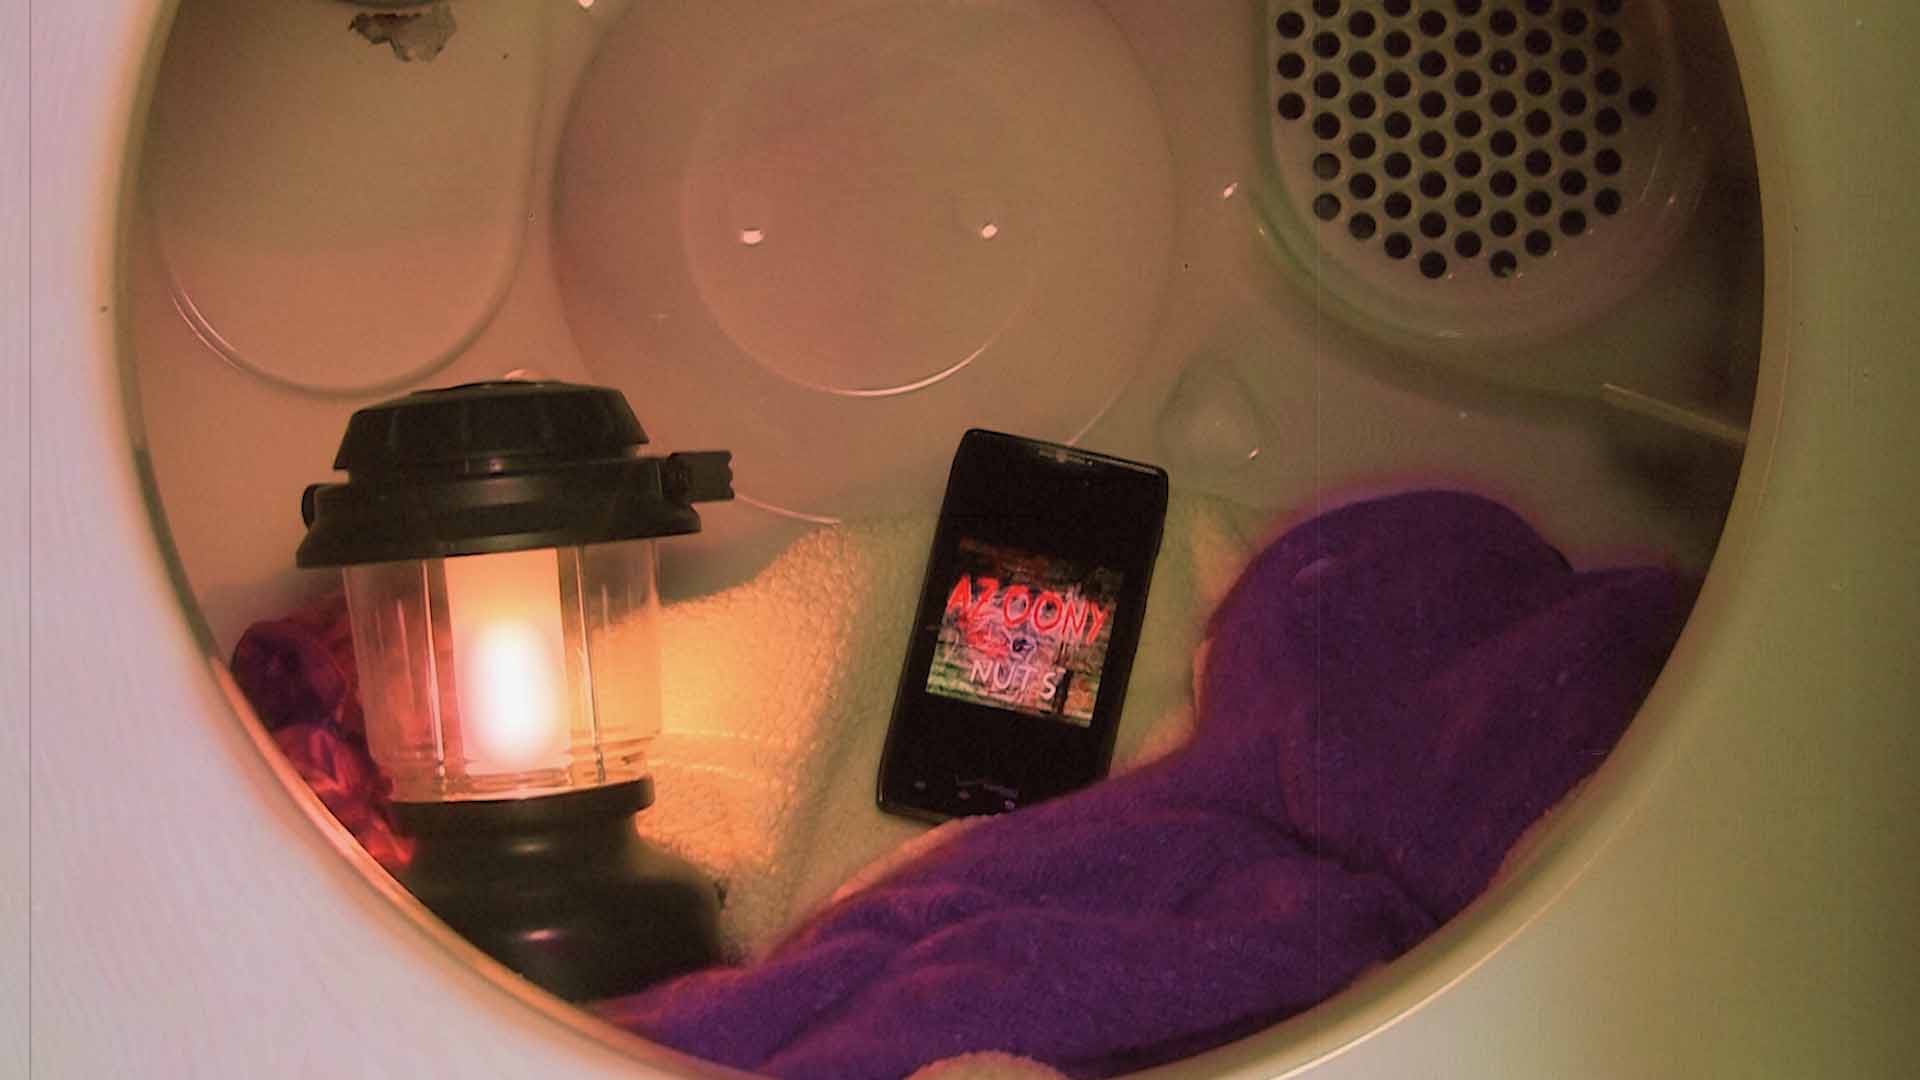 AZooNY-Nuts-Phone-in-Dryer